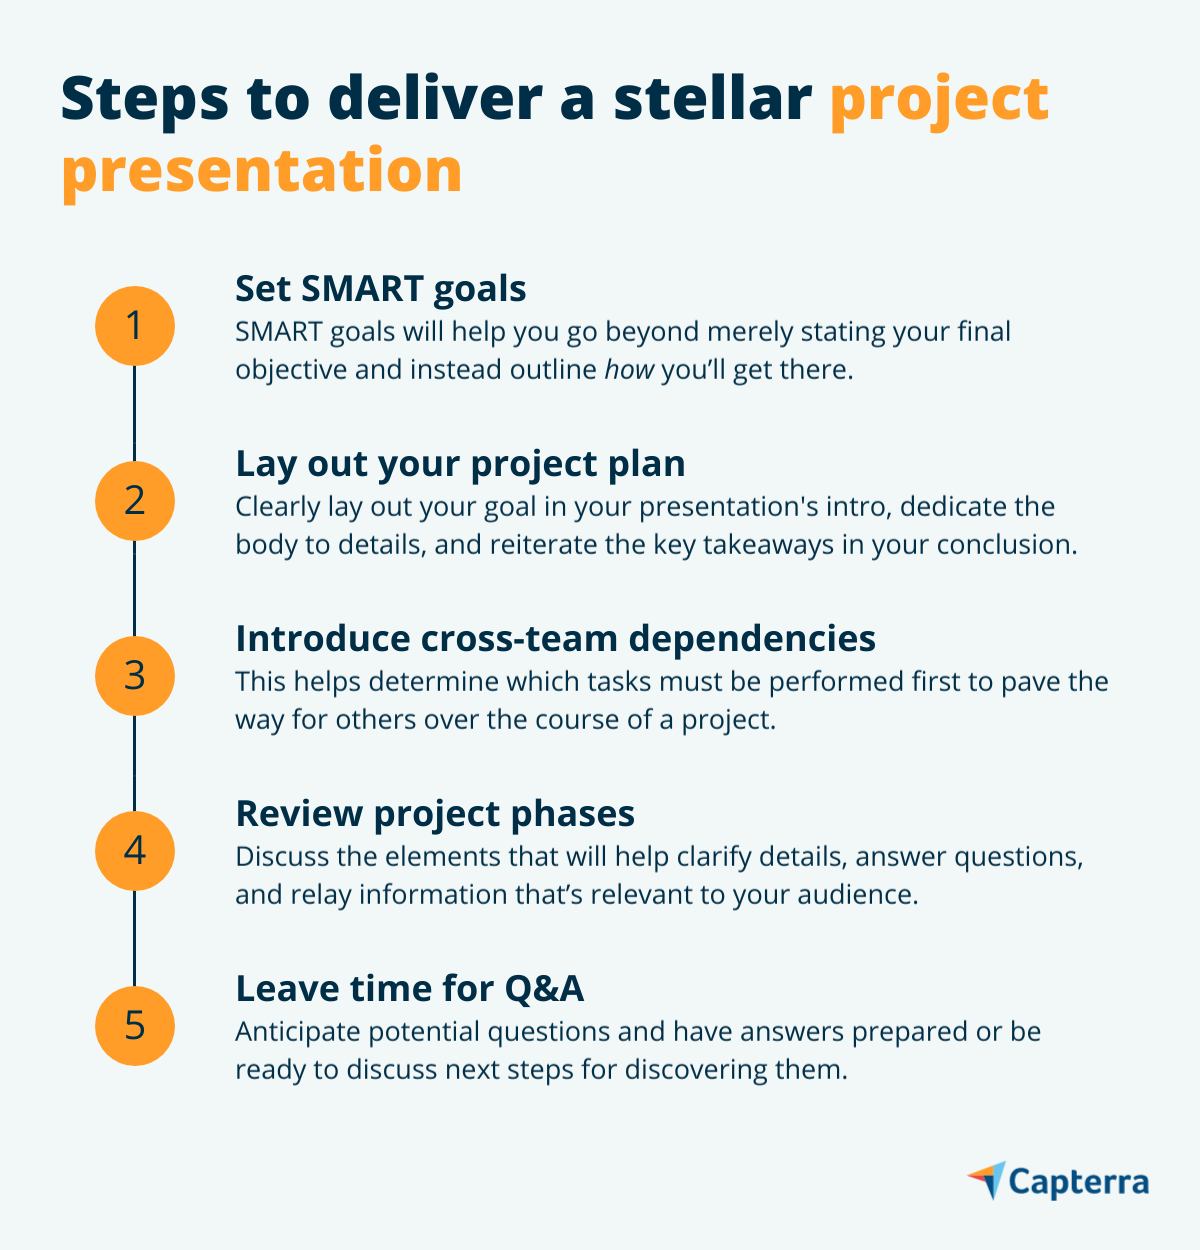 Project presentation steps infographic for the blog article "How To Deliver a Project Presentation Like a Pro"